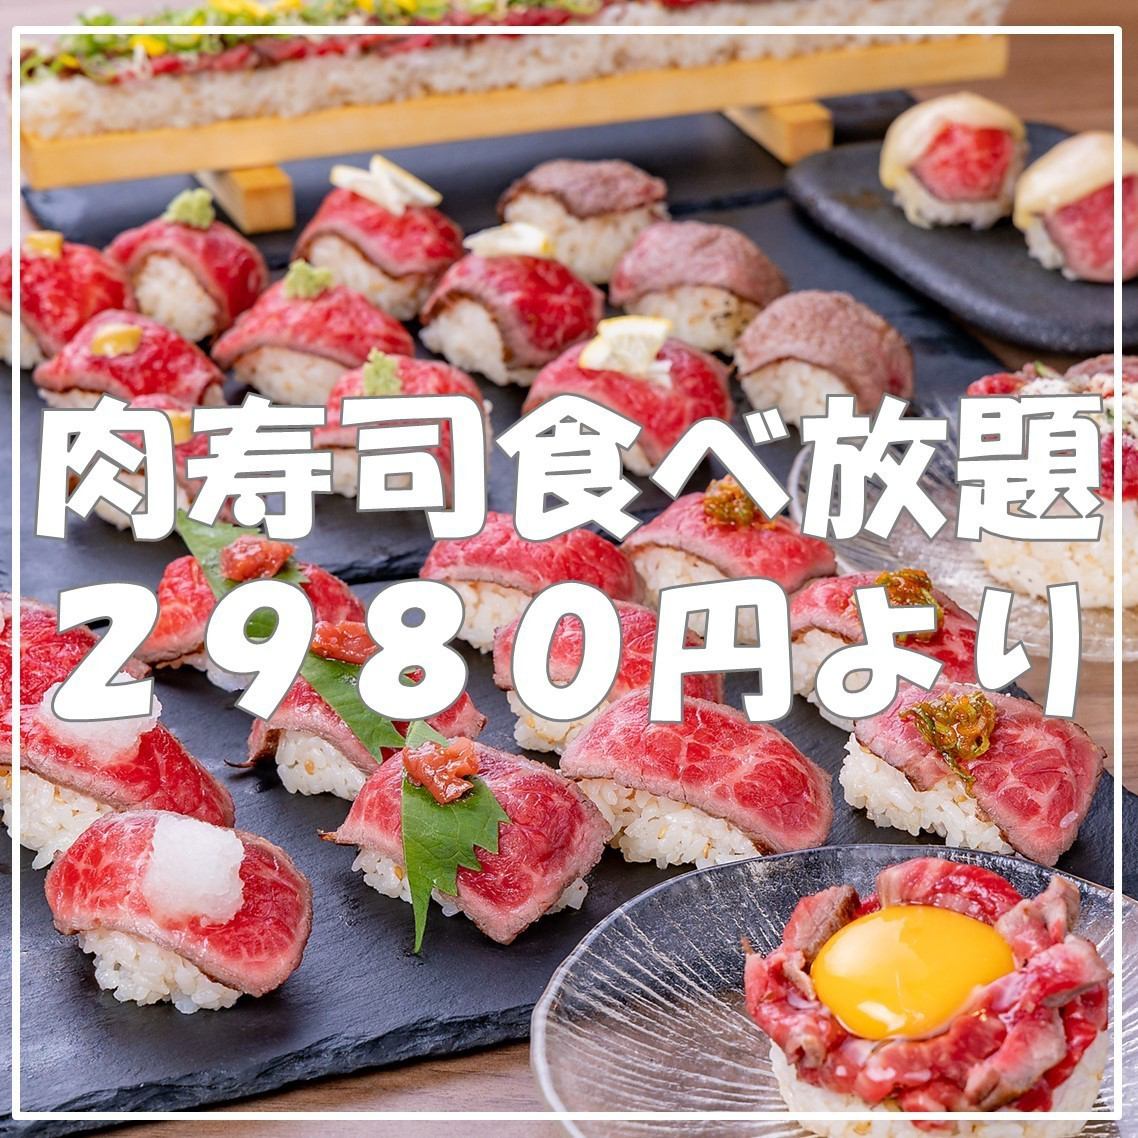 Great on SNS◎All-you-can-eat 13 types including long yukhoe meat sushi★From 2,980 yen